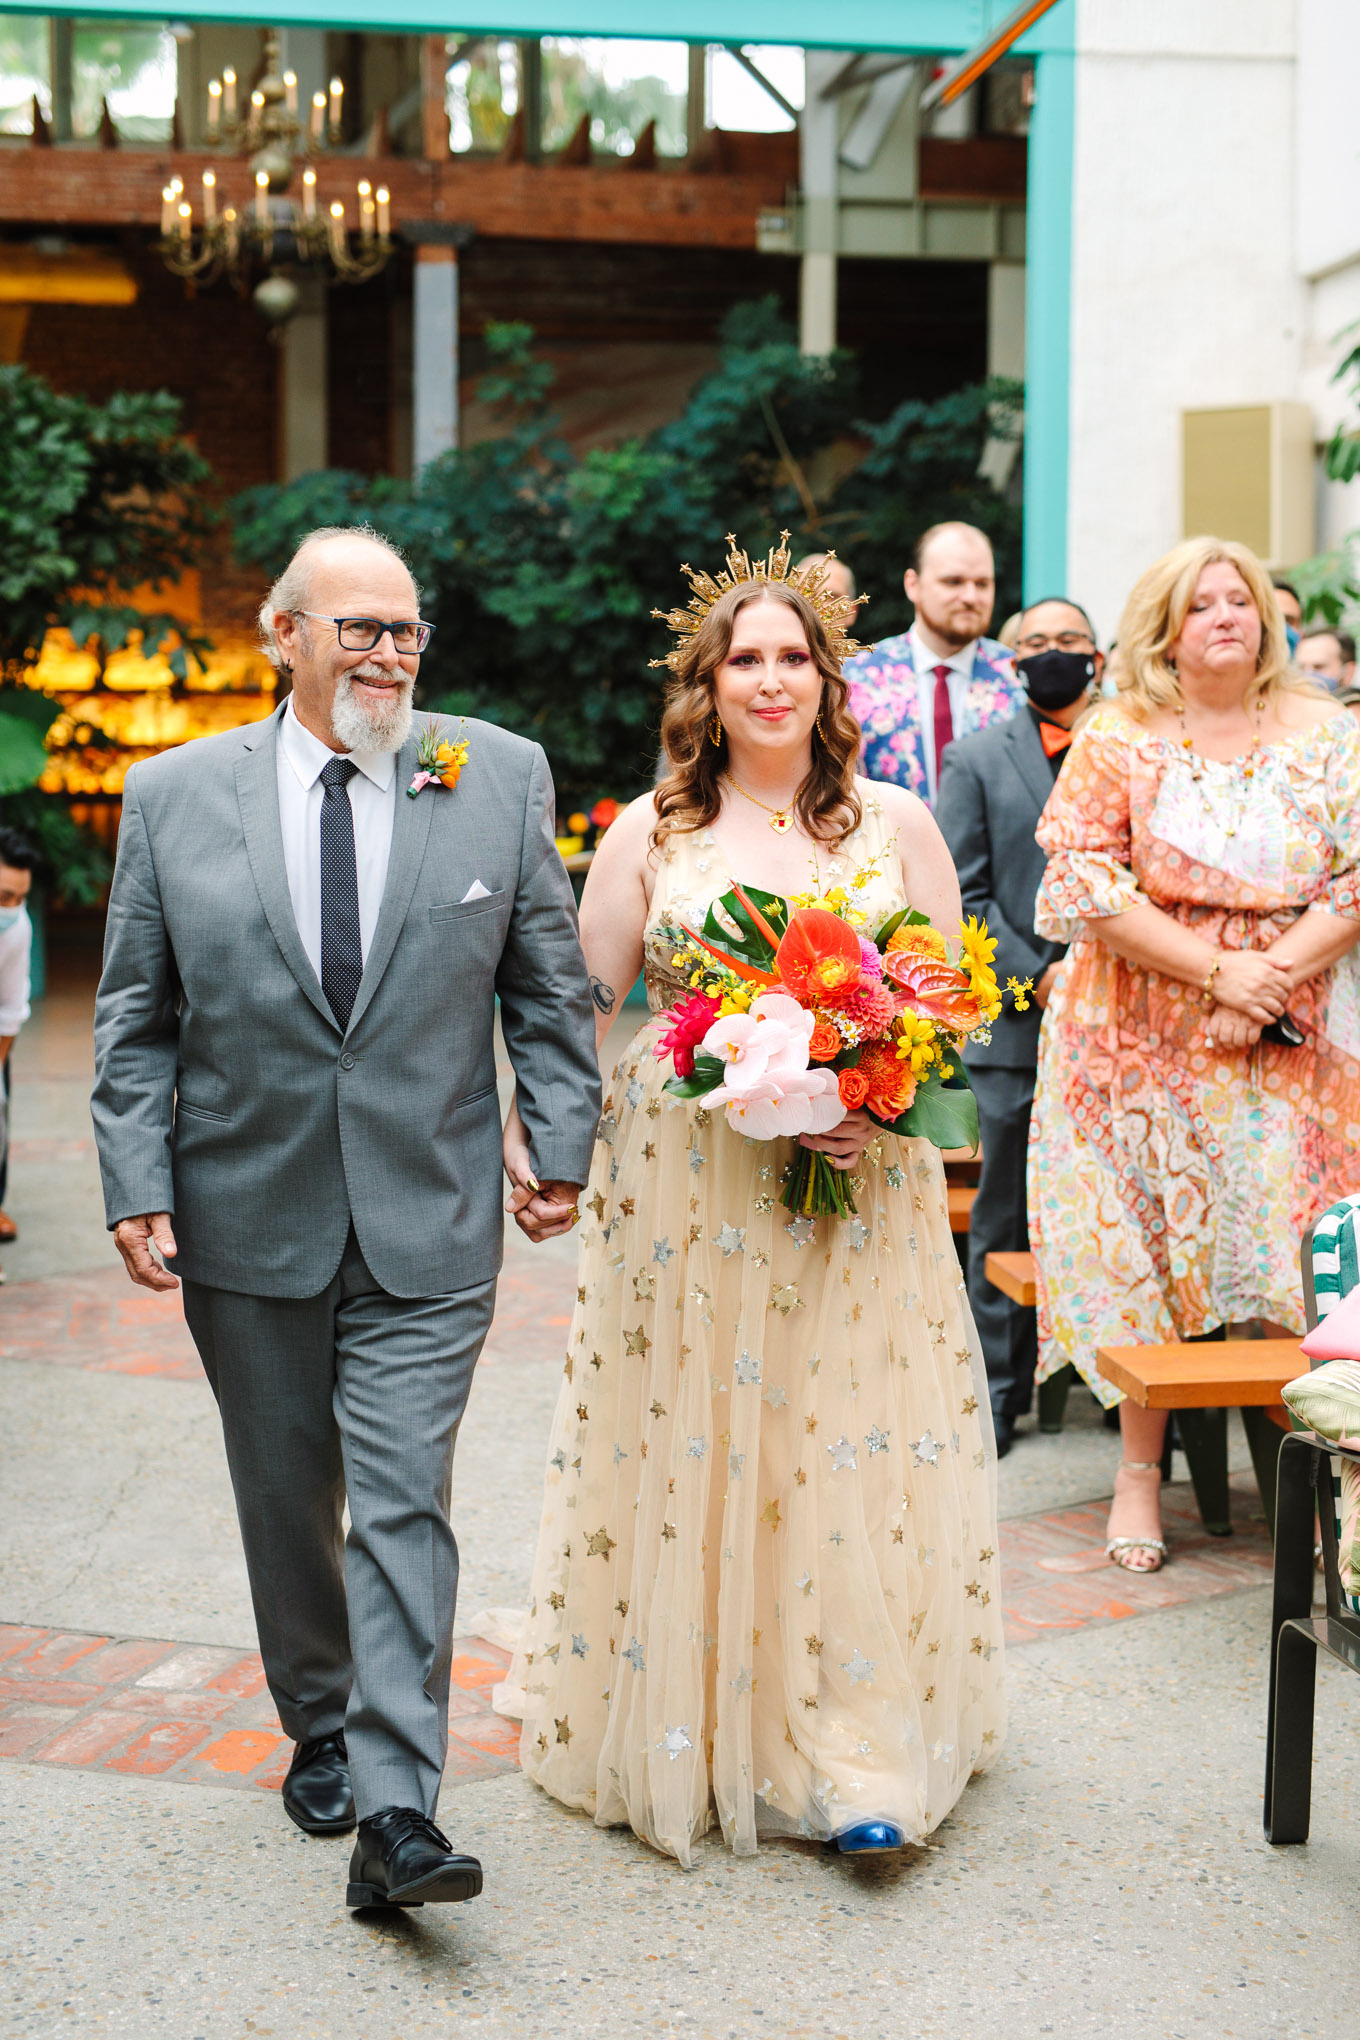 Bride and father walking down the aisle | Colorful Downtown Los Angeles Valentine Wedding | Los Angeles wedding photographer | #losangeleswedding #colorfulwedding #DTLA #valentinedtla   Source: Mary Costa Photography | Los Angeles